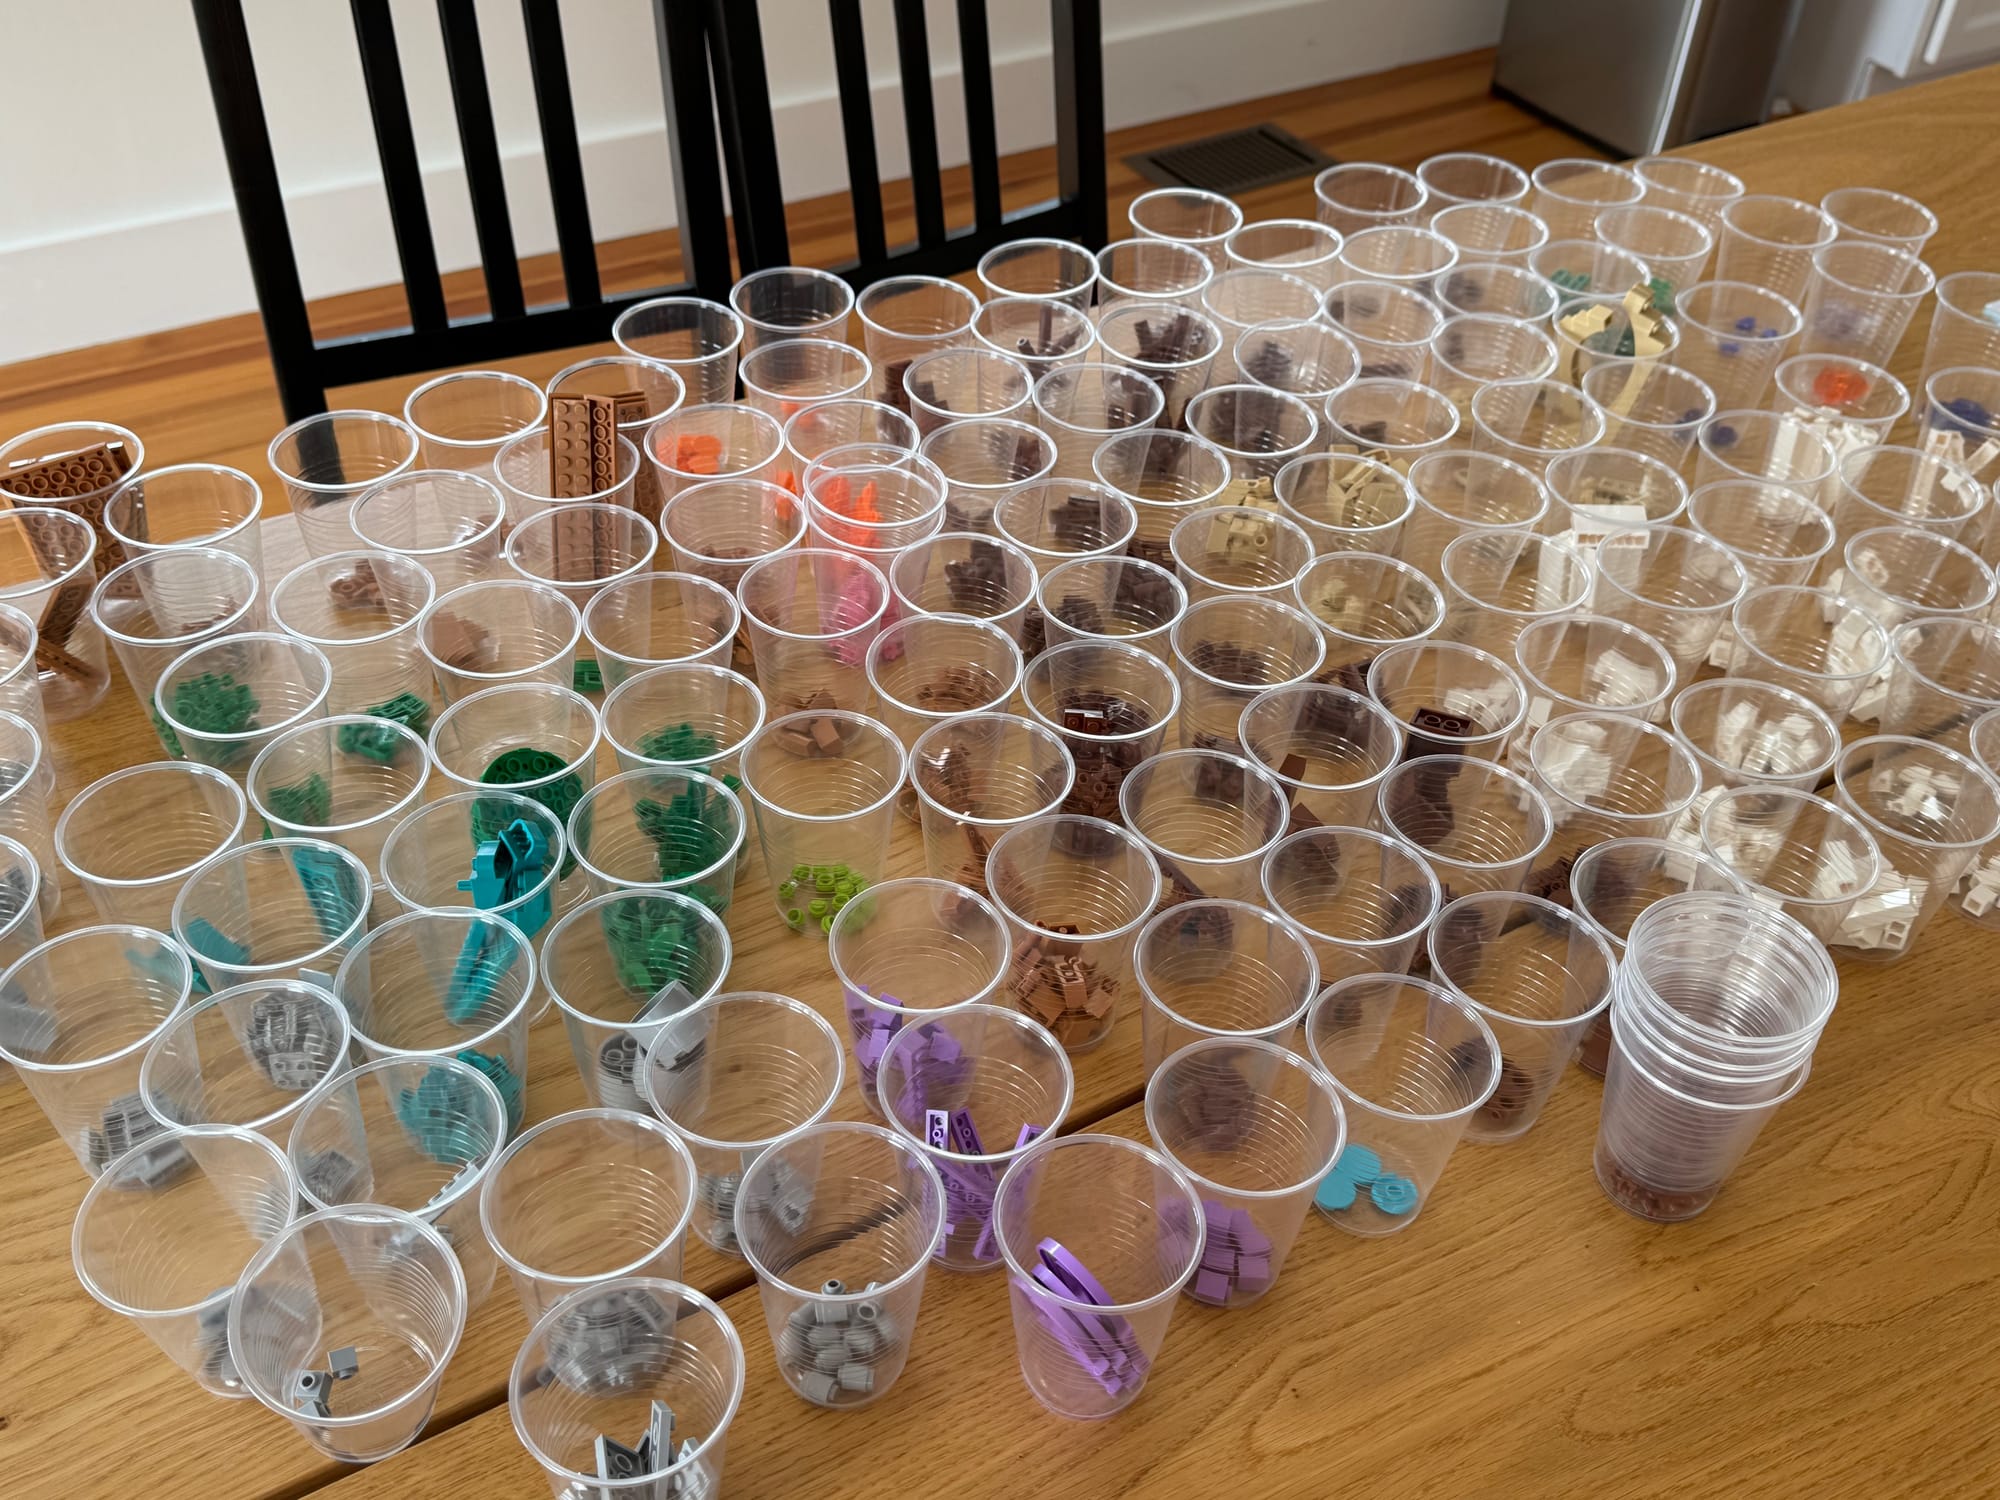 LEGO pieces separated into small plastic cups based on color and part type